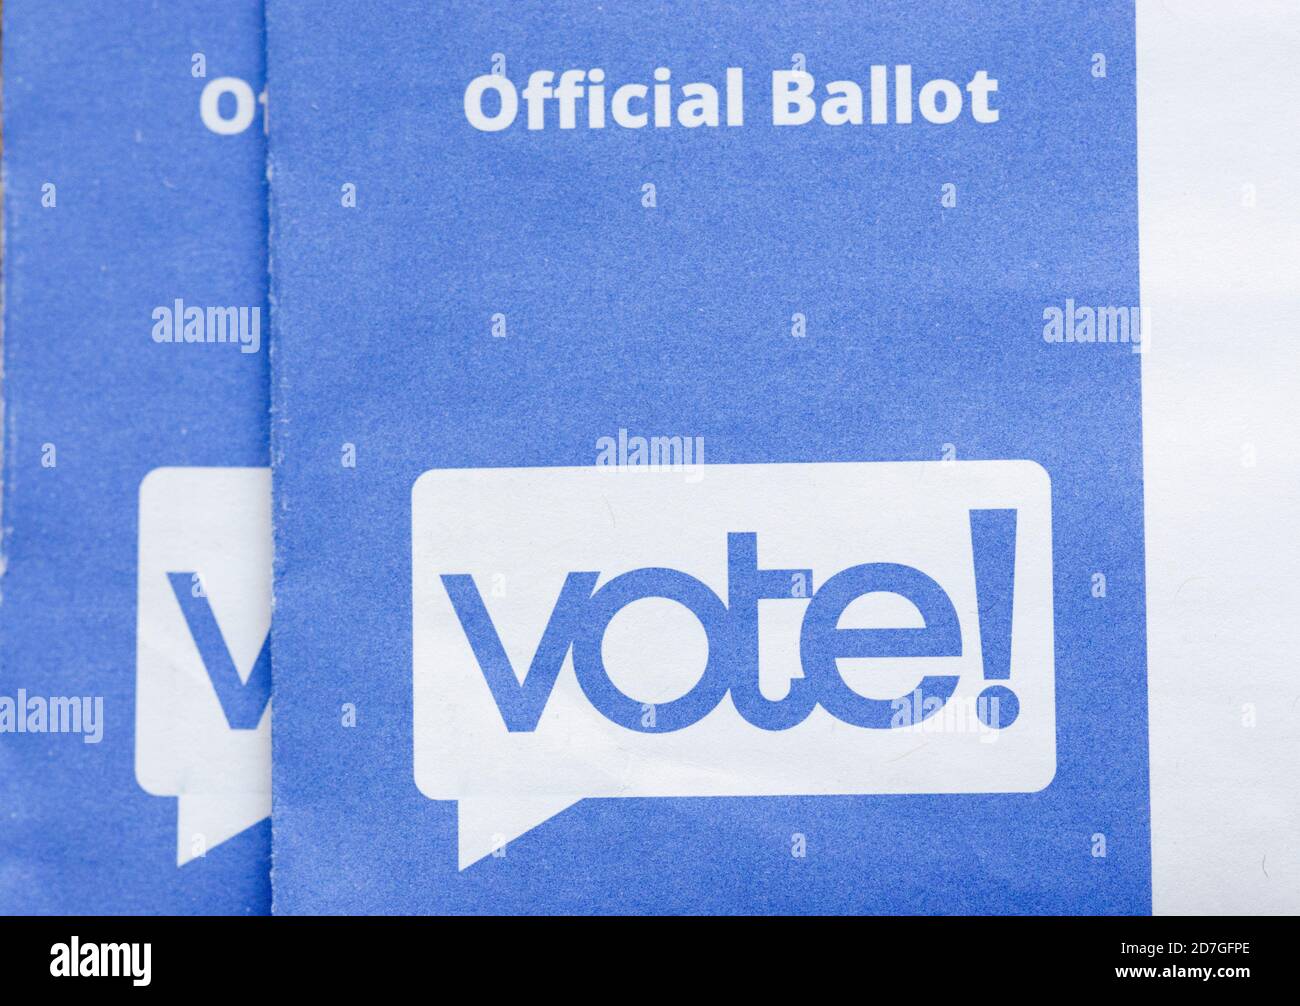 Official Ballots mailed to residents of the state of Washington in advance of Election Day, November 3, 2020. Stock Photo